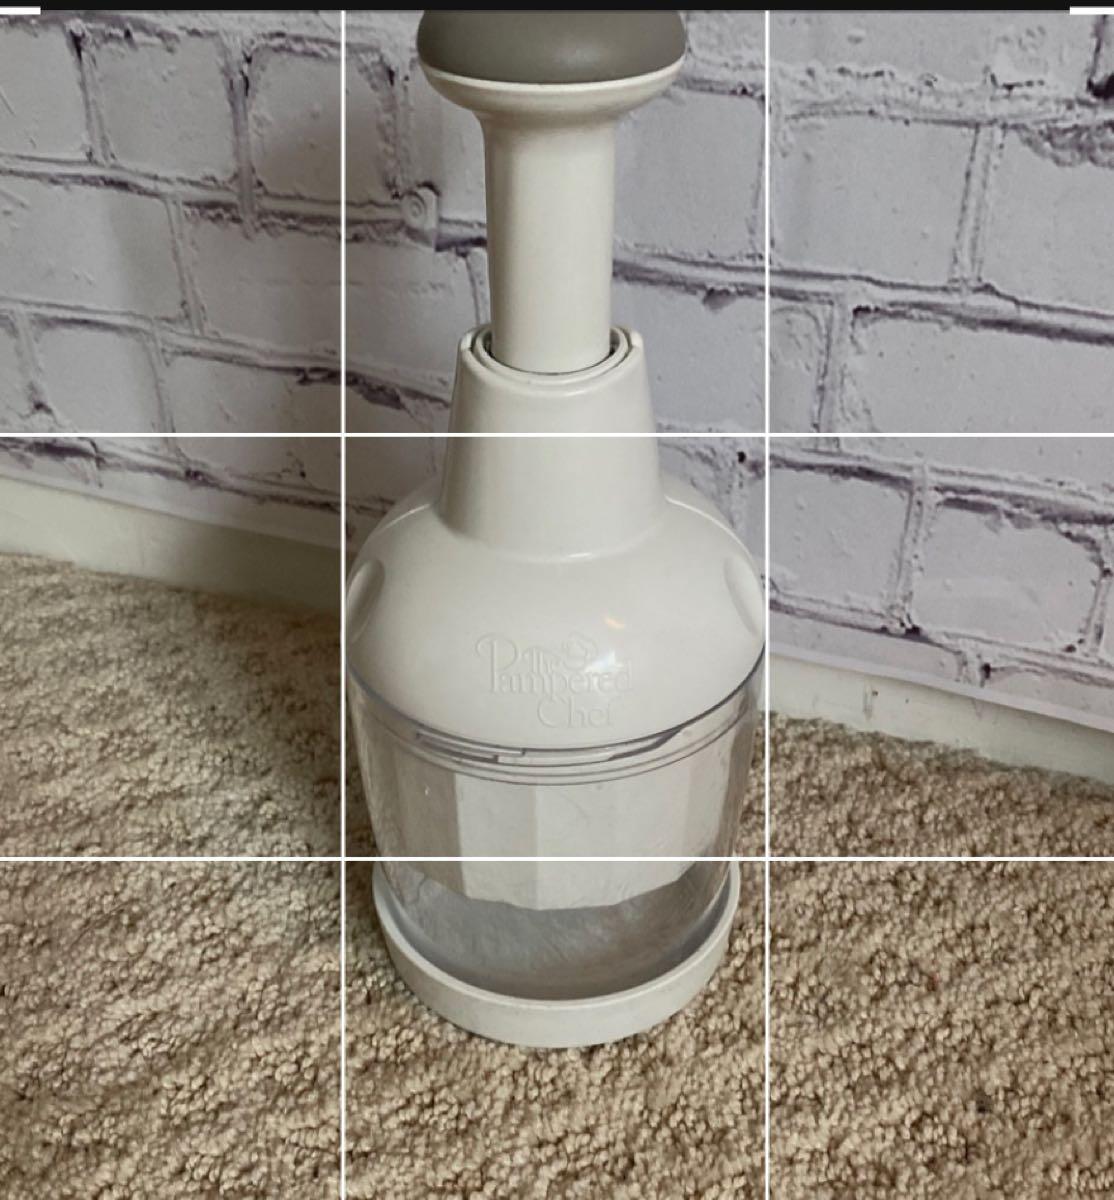 The Pampered Chef Food Chopper (#2585)-White For $20 In Glen Mills, PA